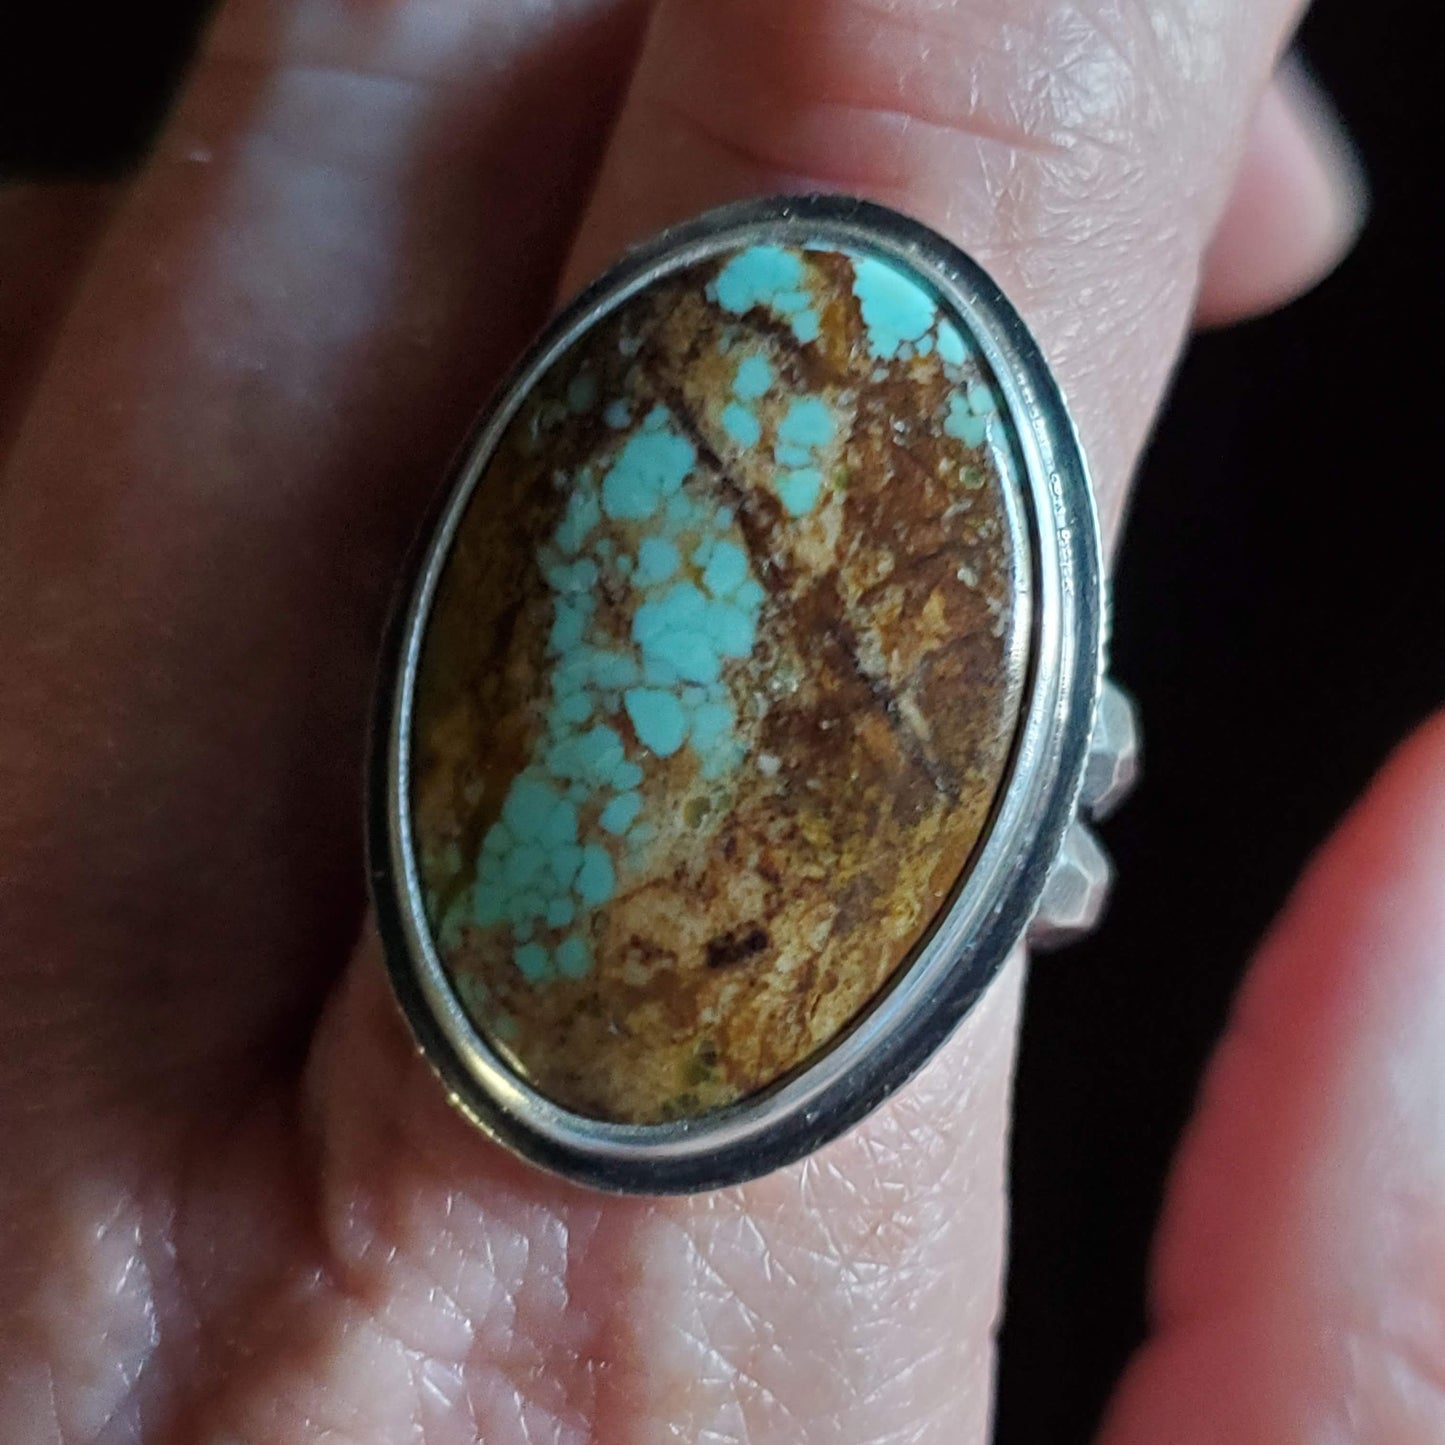 Scarred Ring, #8 Mine Turquoise, Size 9 to 9-1/4